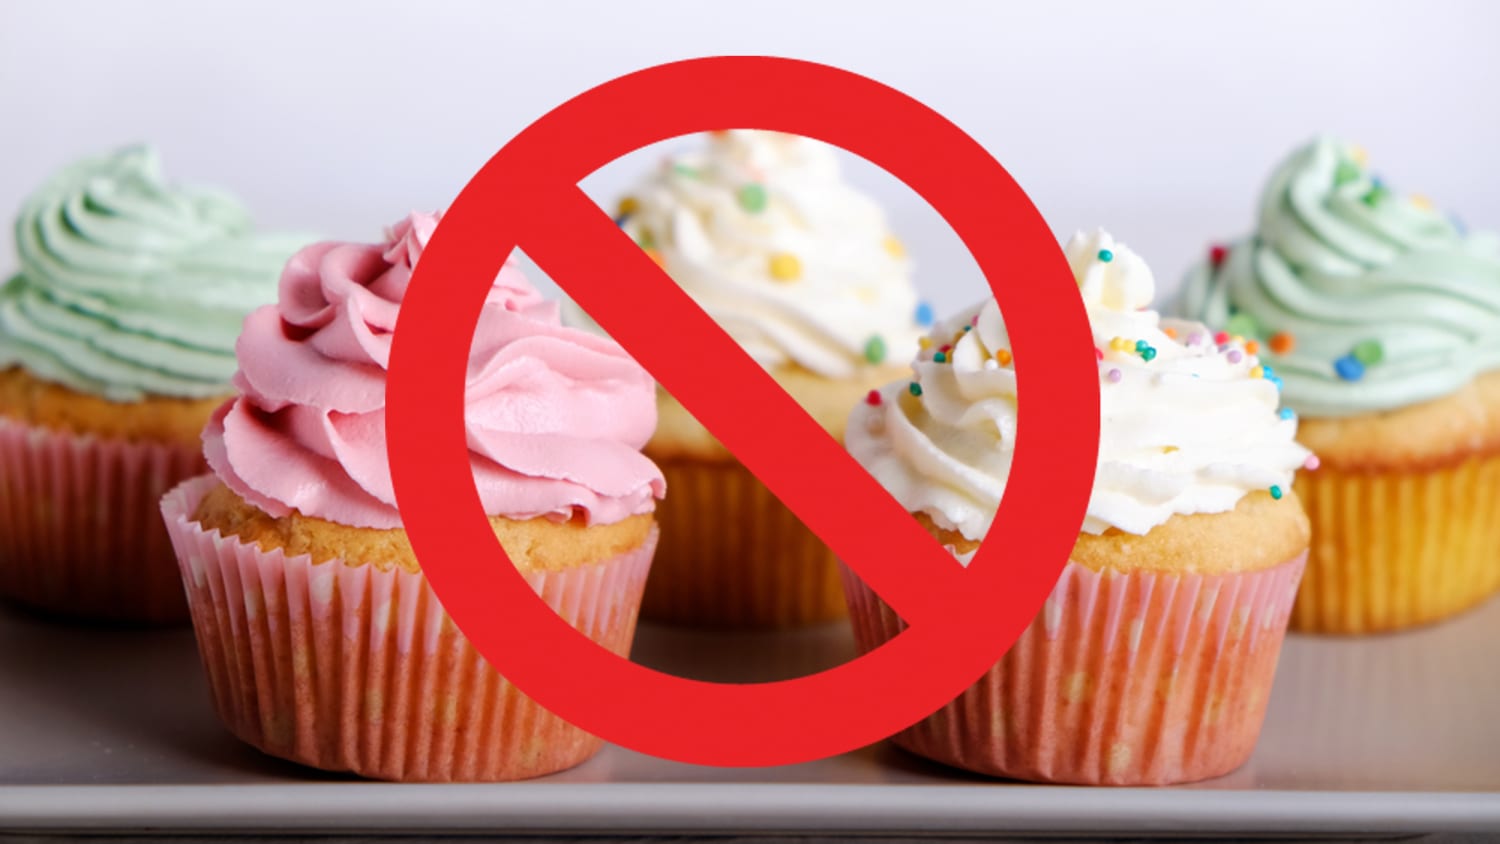 School district bans food from all class parties - TODAY.com2500 x 1407